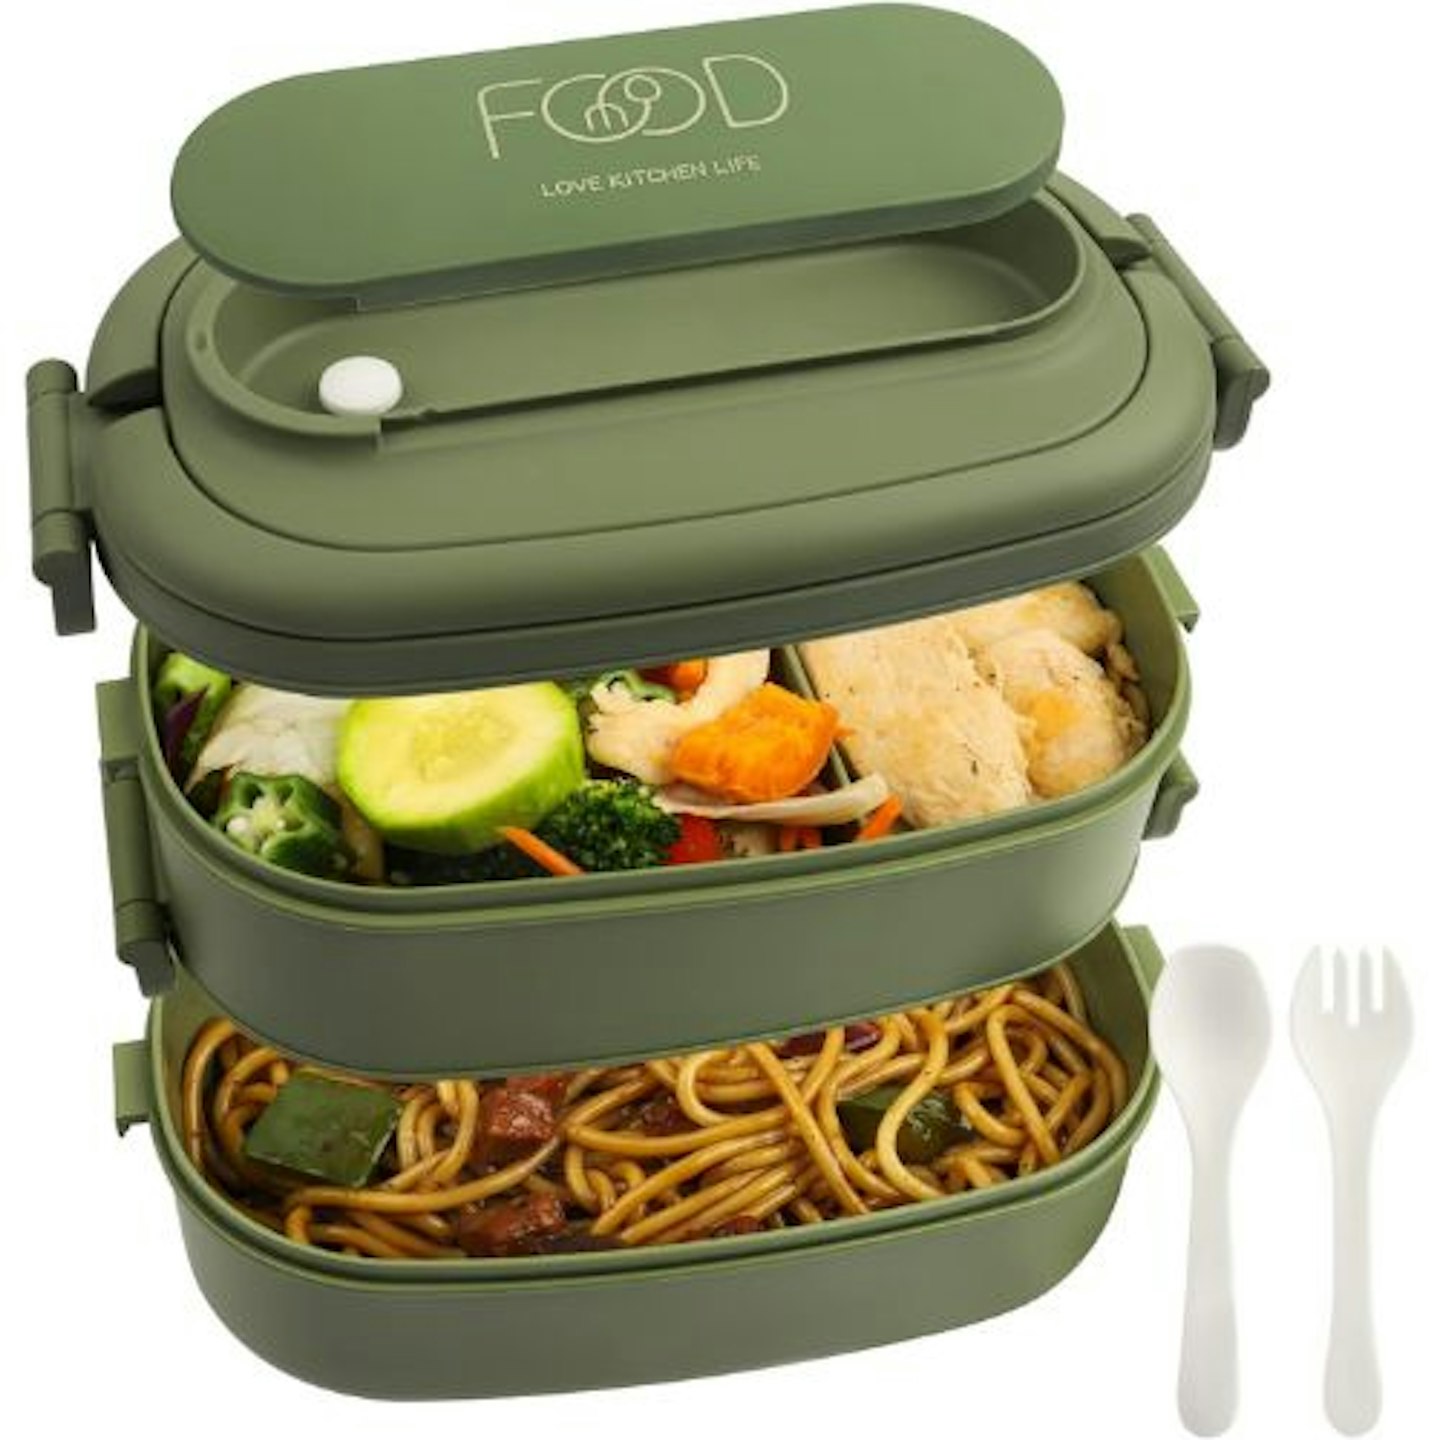 OITUGG 2 Layer Lunch Box